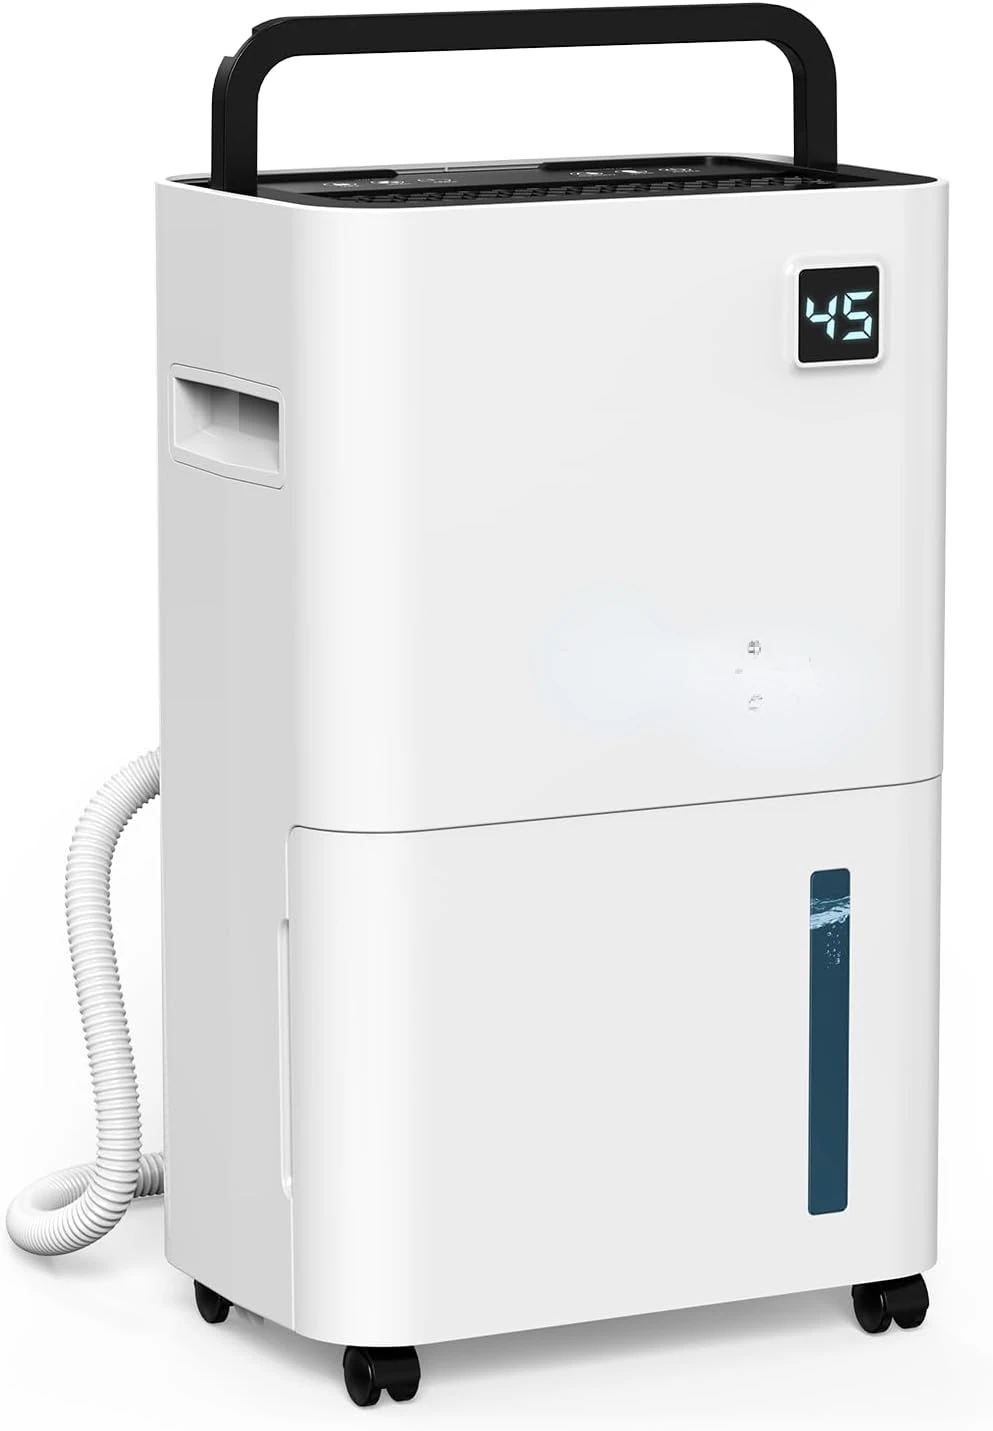 

50 Pint Dehumidifier for Home Basements - 3,500 Sq Ft Quiet Dehumidifier with Drain Hose, 0.66 Gallons Water Tank, Wheels and Ha